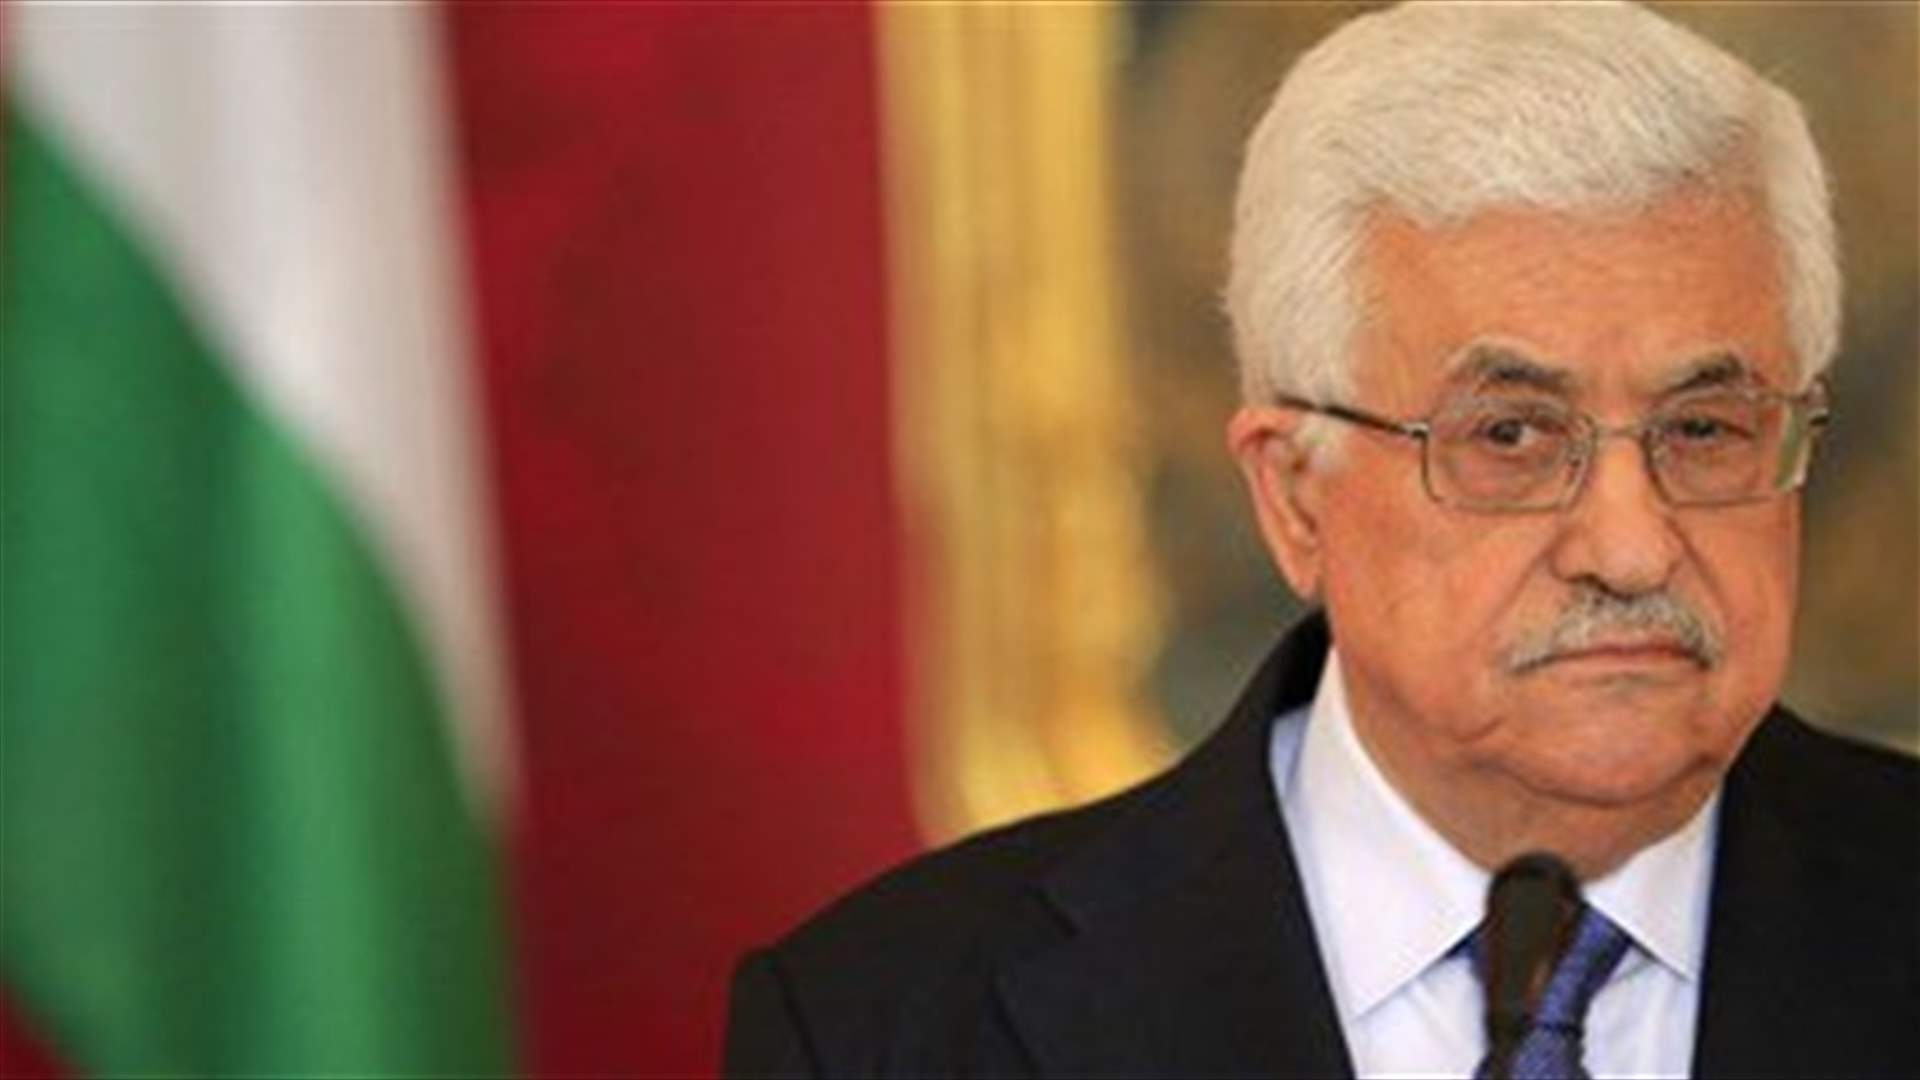 Palestinian leader Abbas in hospital for third time in a week -officials